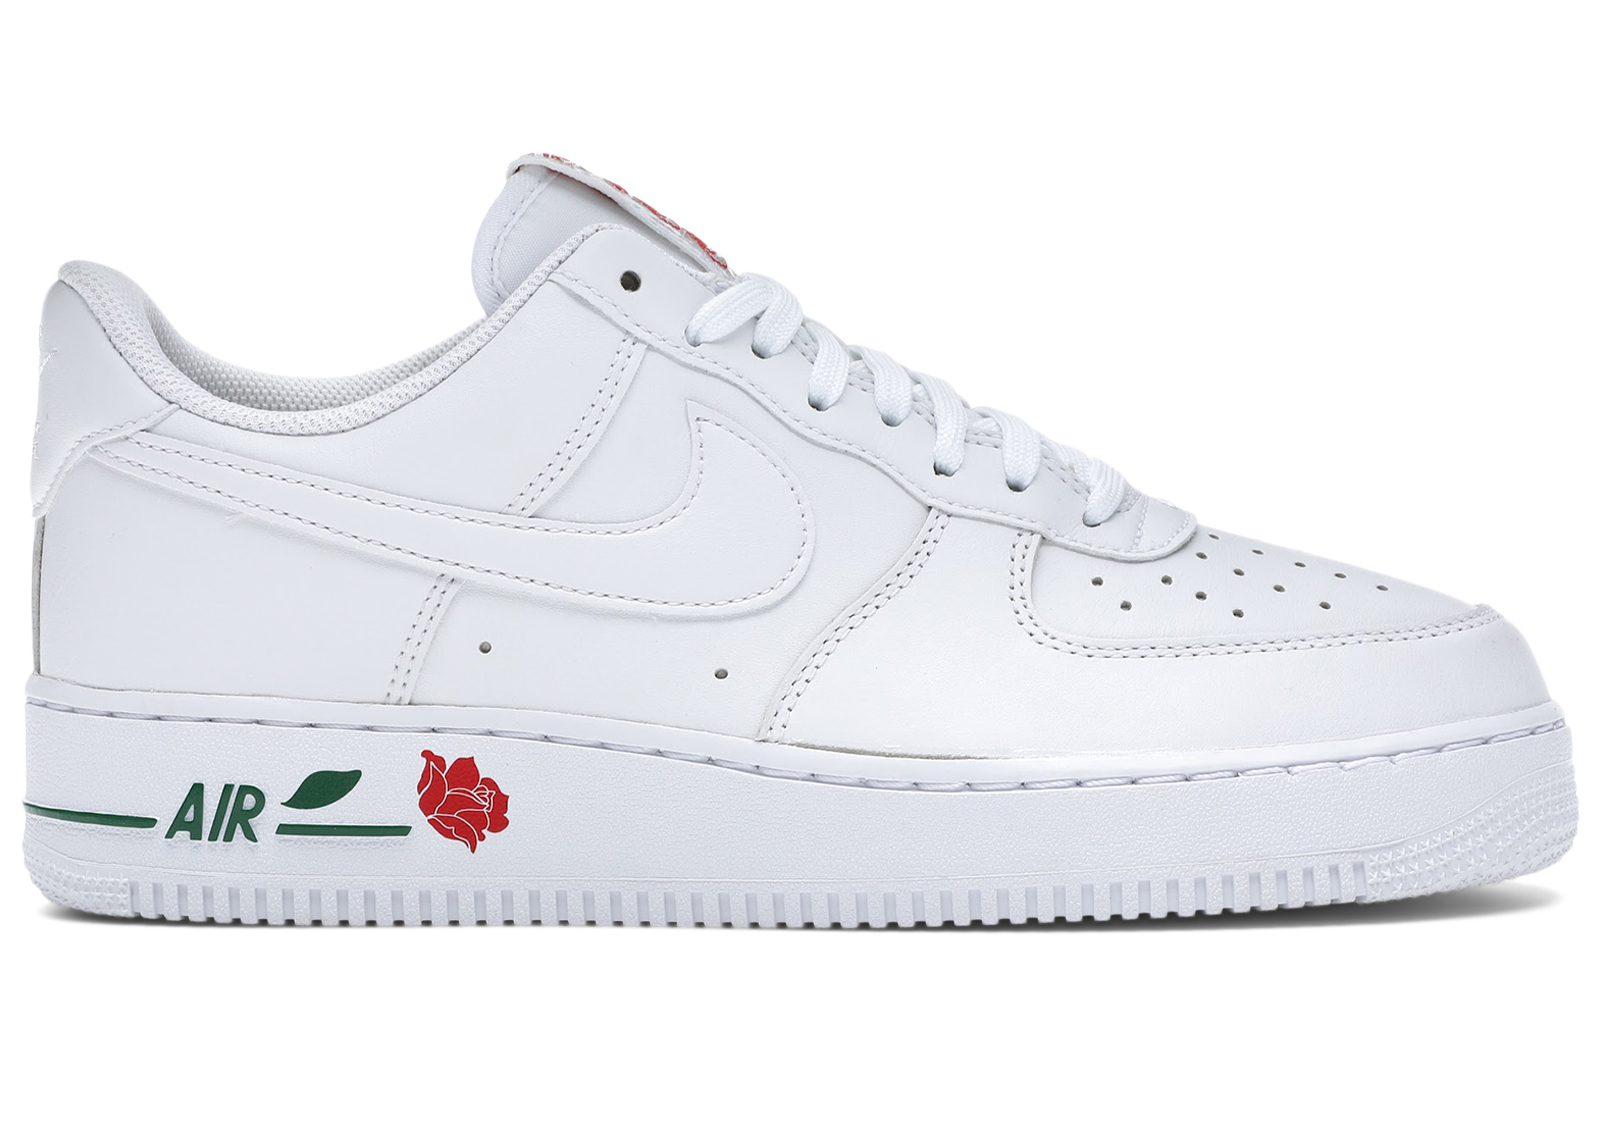 air force 1 donna rosa e rosse